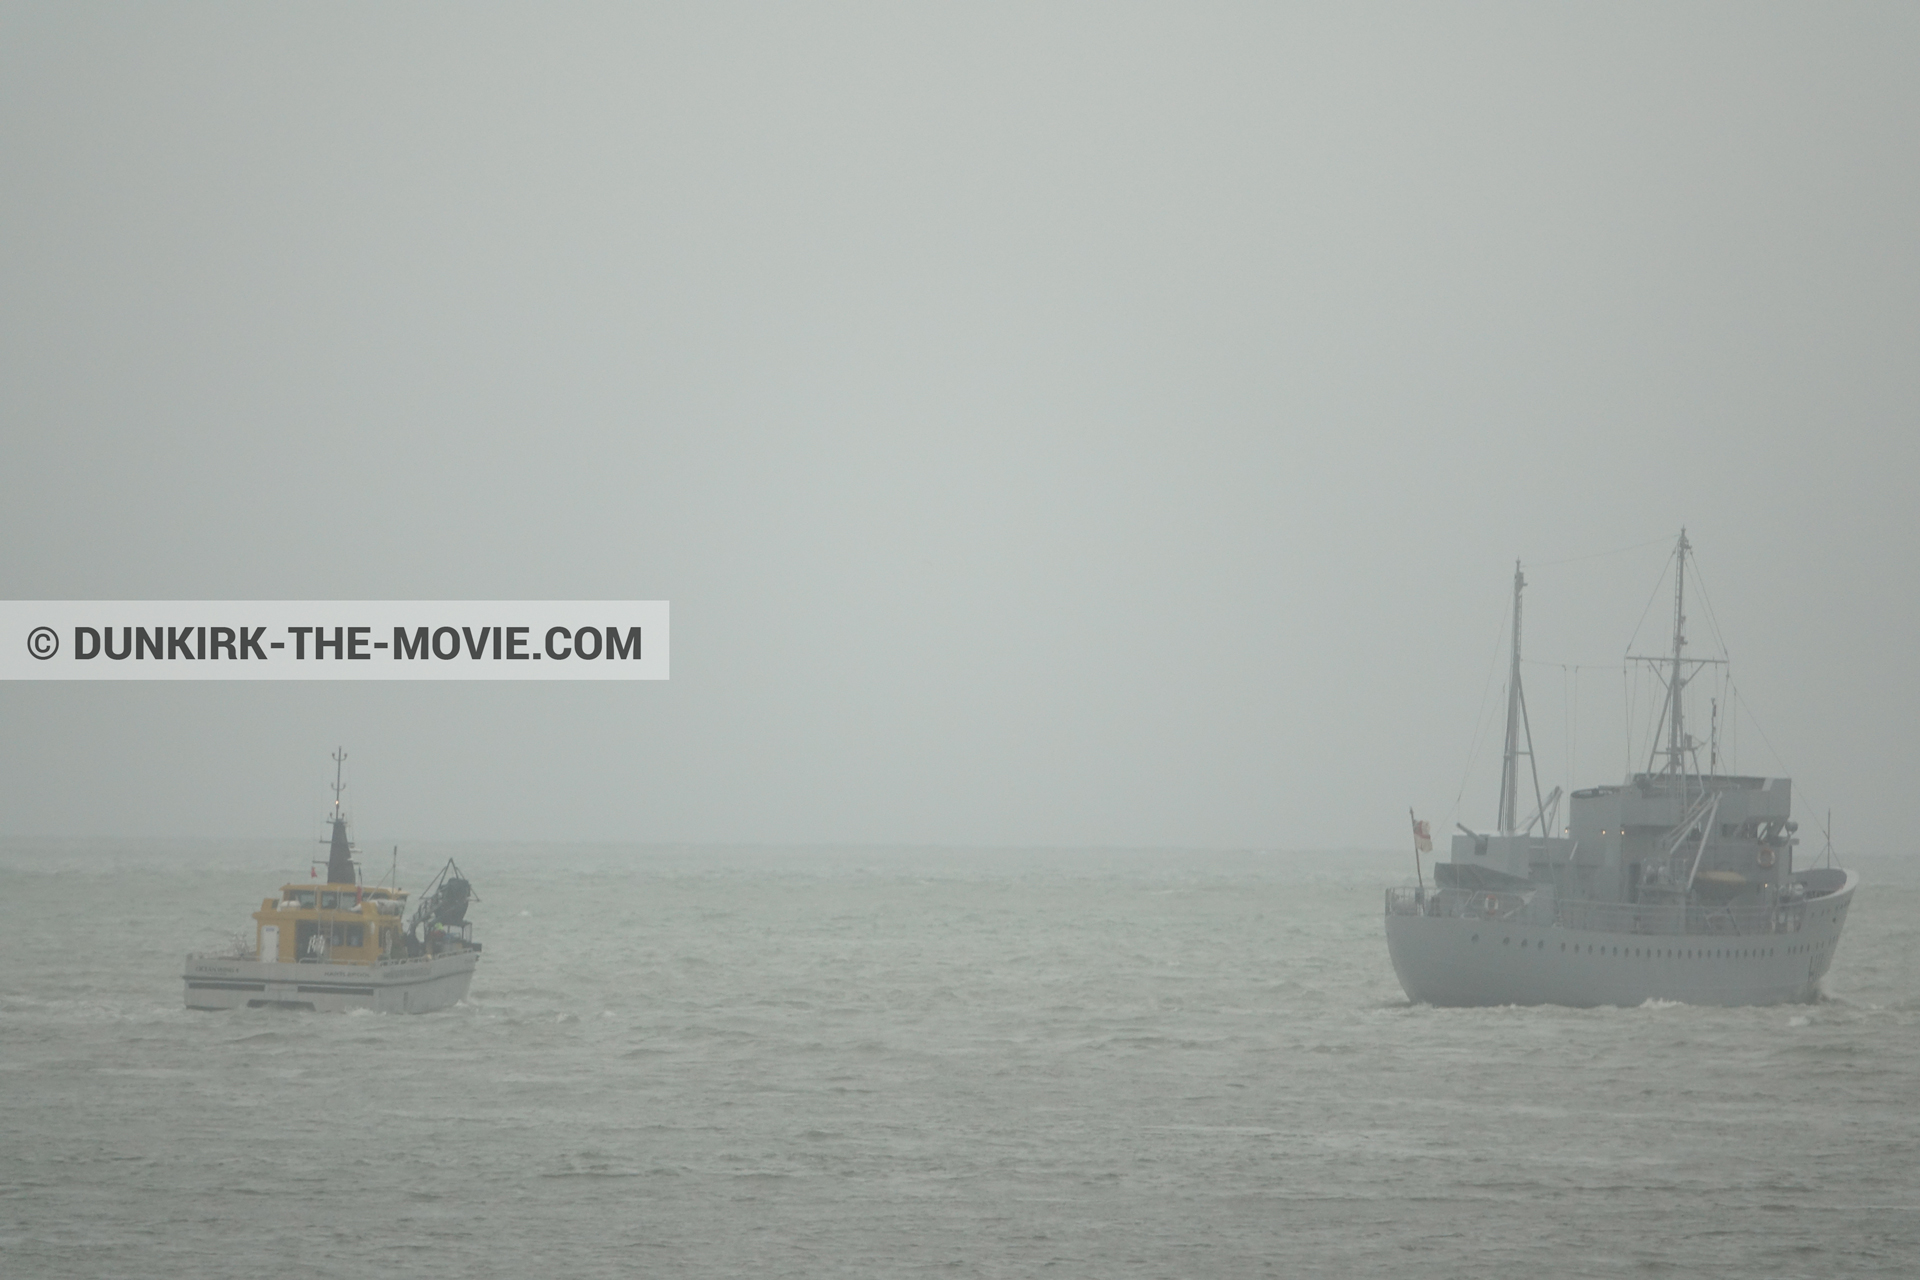 Picture with boat, grey sky, H11 - MLV Castor, calm sea, Ocean Wind 4,  from behind the scene of the Dunkirk movie by Nolan